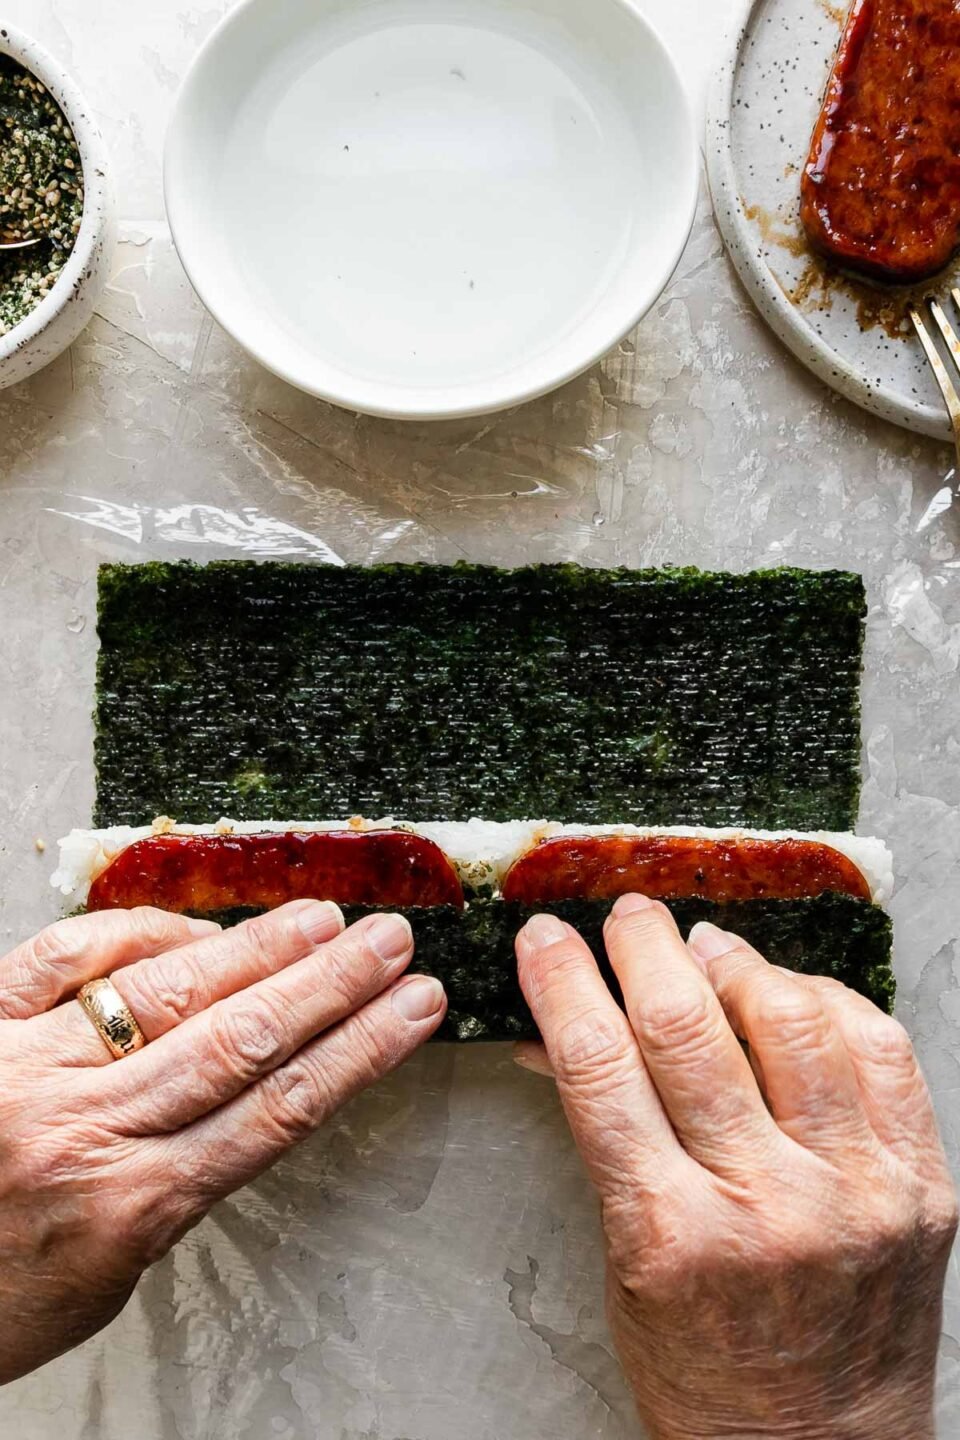 A close up of a woman's hands work to pull the side of the nori sheet closest to her up and over the inside of the spam musubi. Resting above the almost finished musubi is a small bowl filled with furikake seasoning with a spoon resting inside, another small white bowl filled with water, and a small speckled ceramic plate with pan-fried teriyaki Spam.